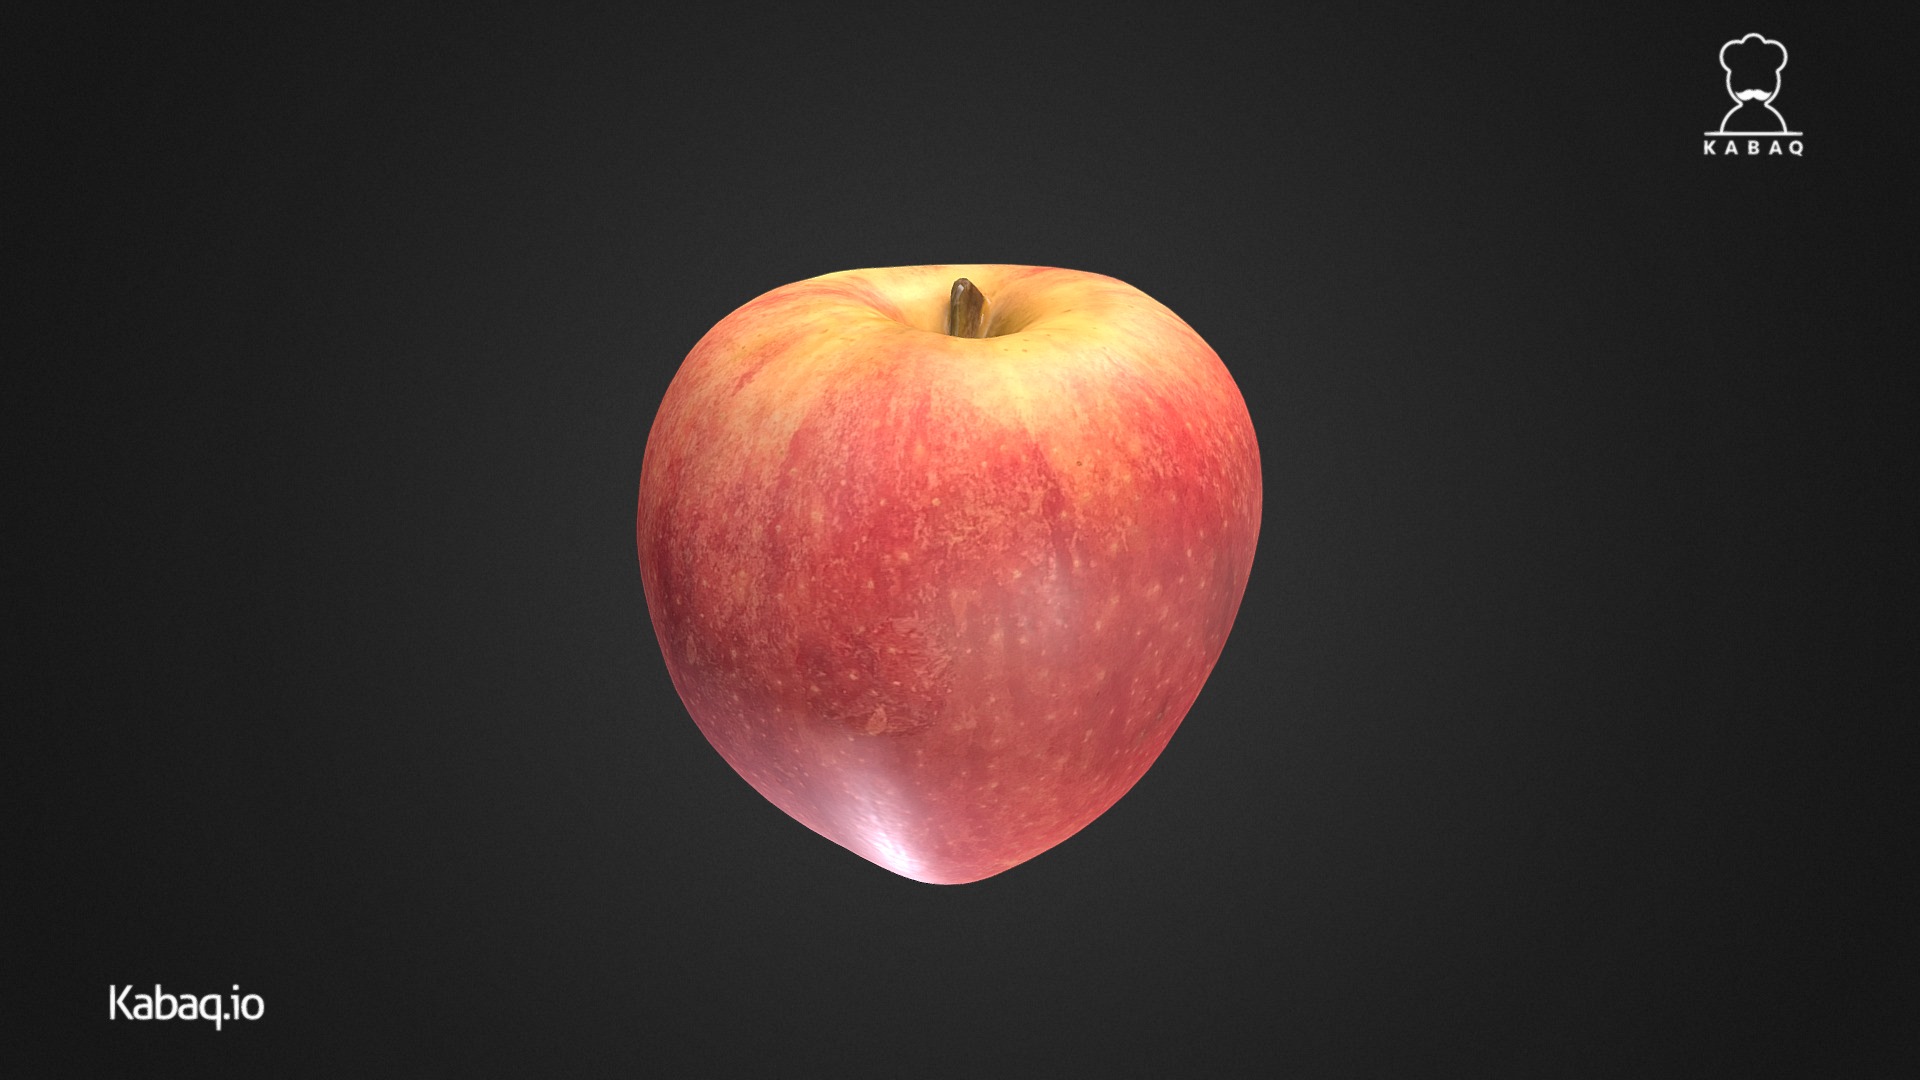 3D model Red Apple - This is a 3D model of the Red Apple. The 3D model is about a red apple with a black background.